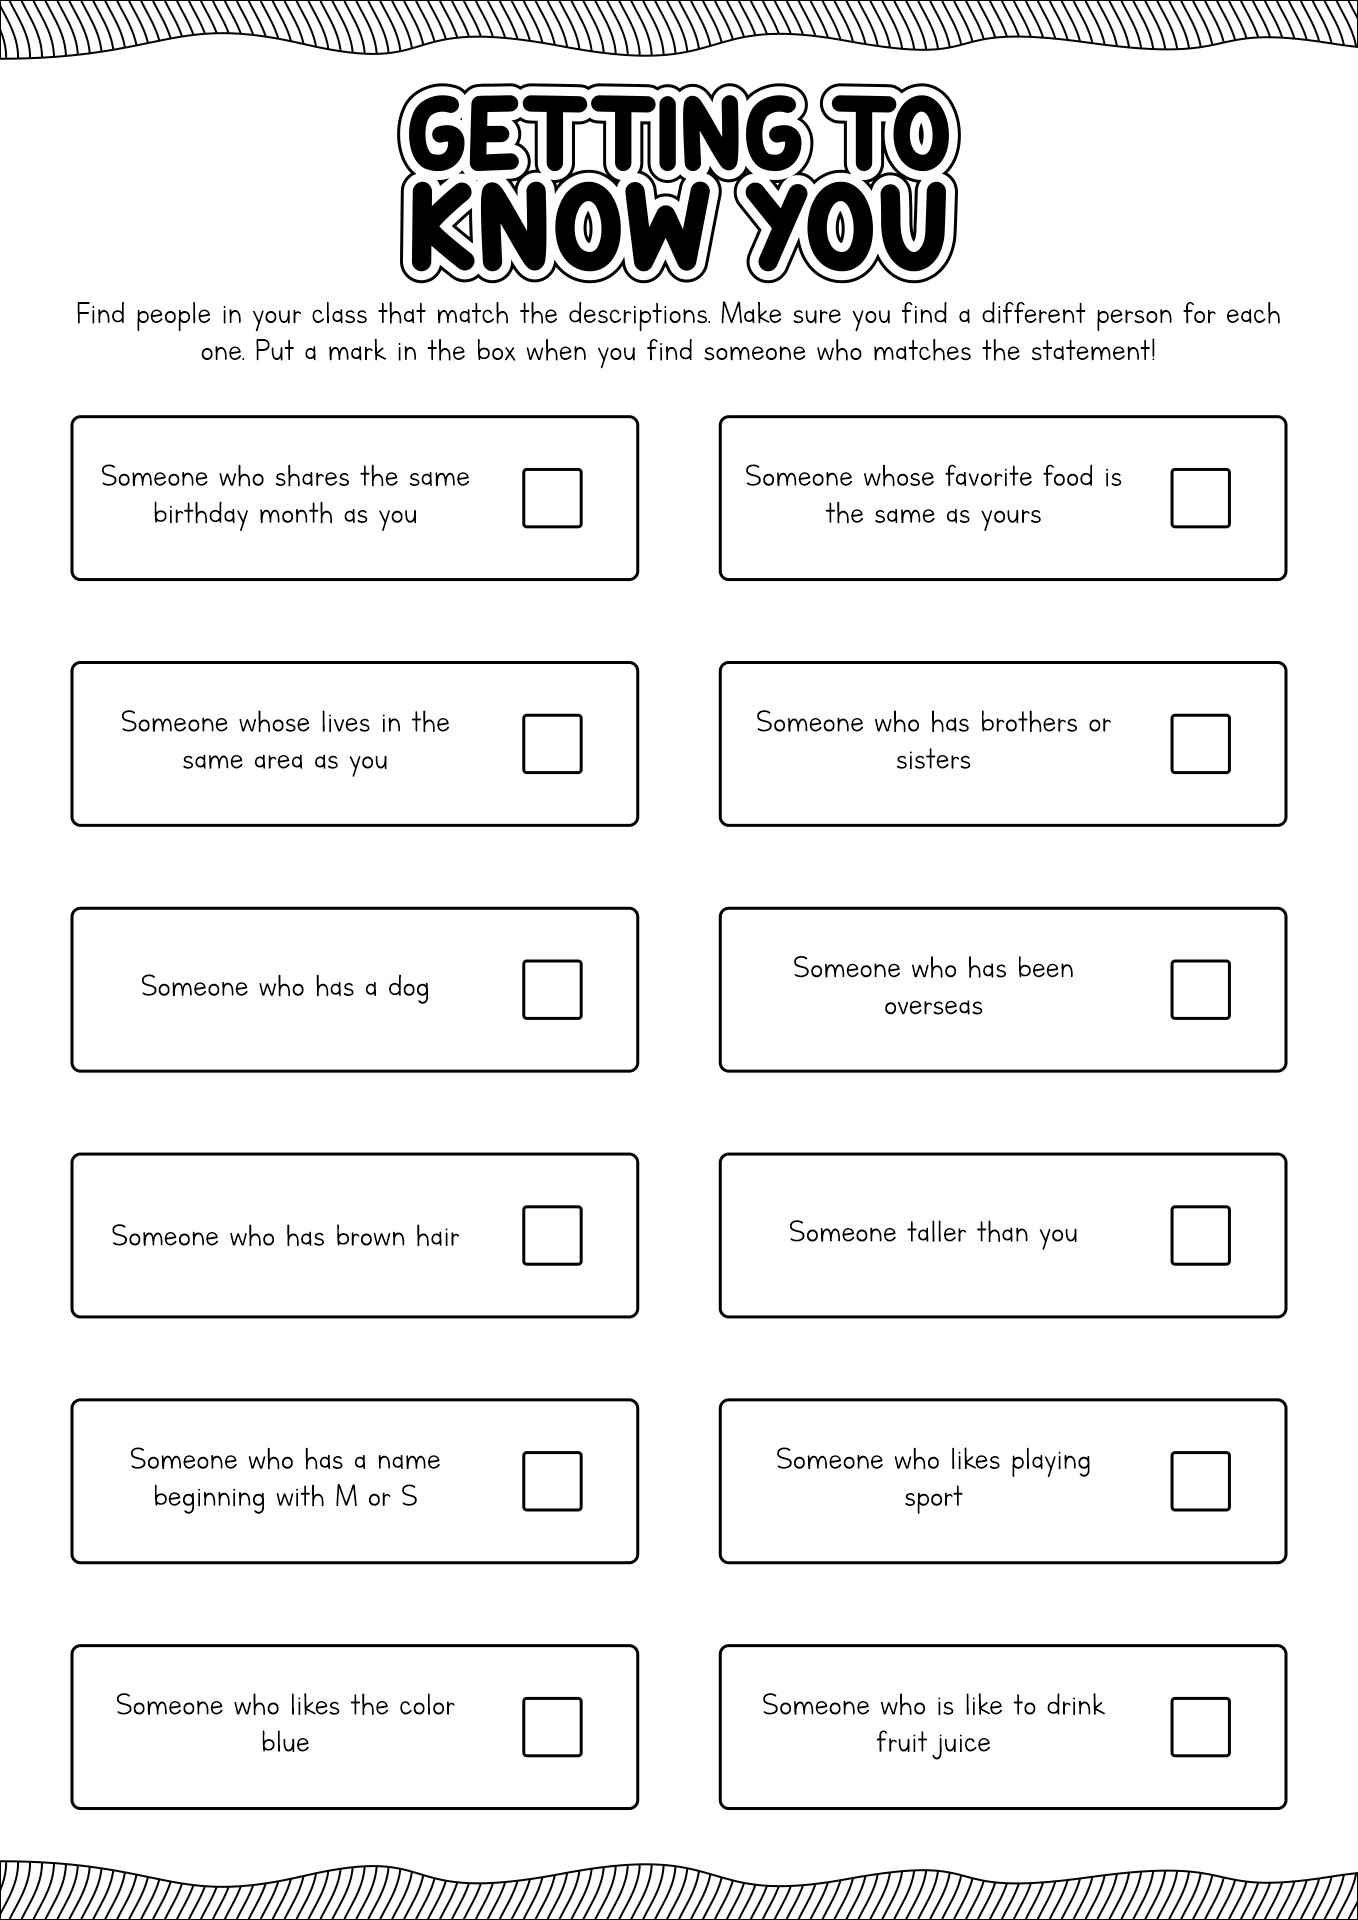 Getting to Know You Worksheet for Adults Printable Image